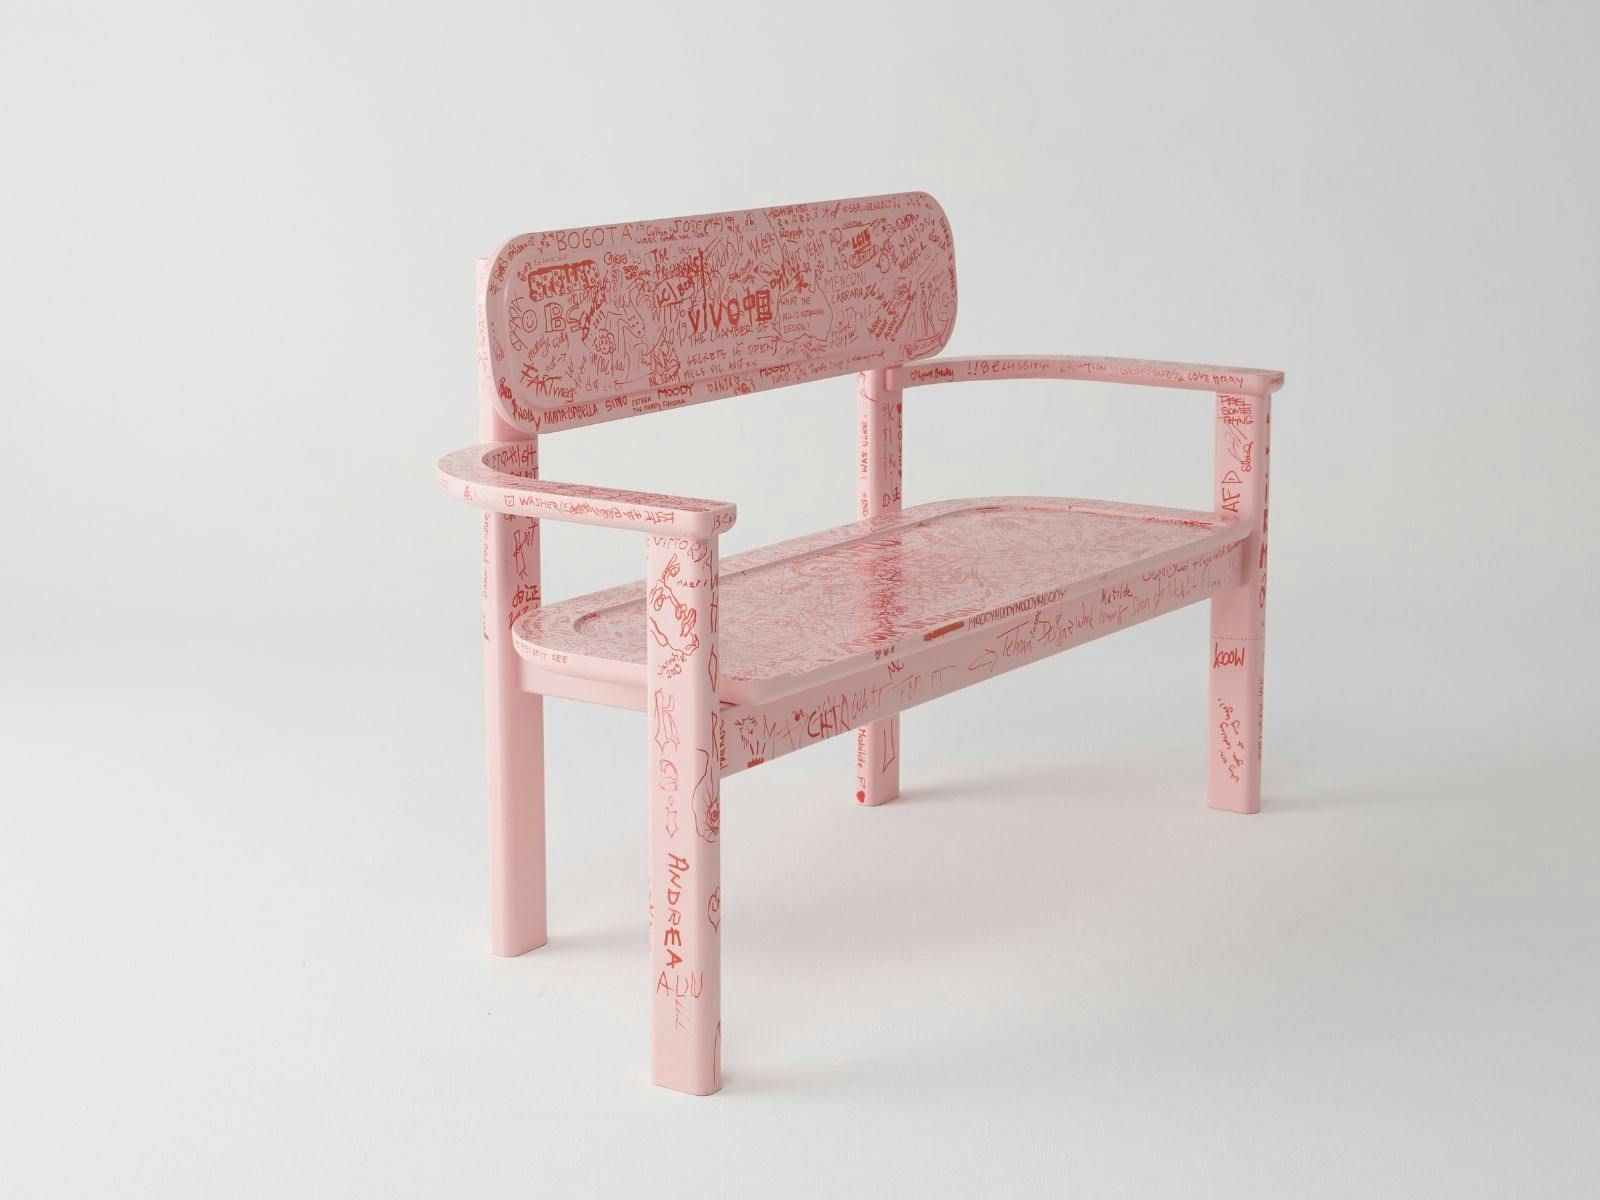 Pink bench seat with images drawn in red ink